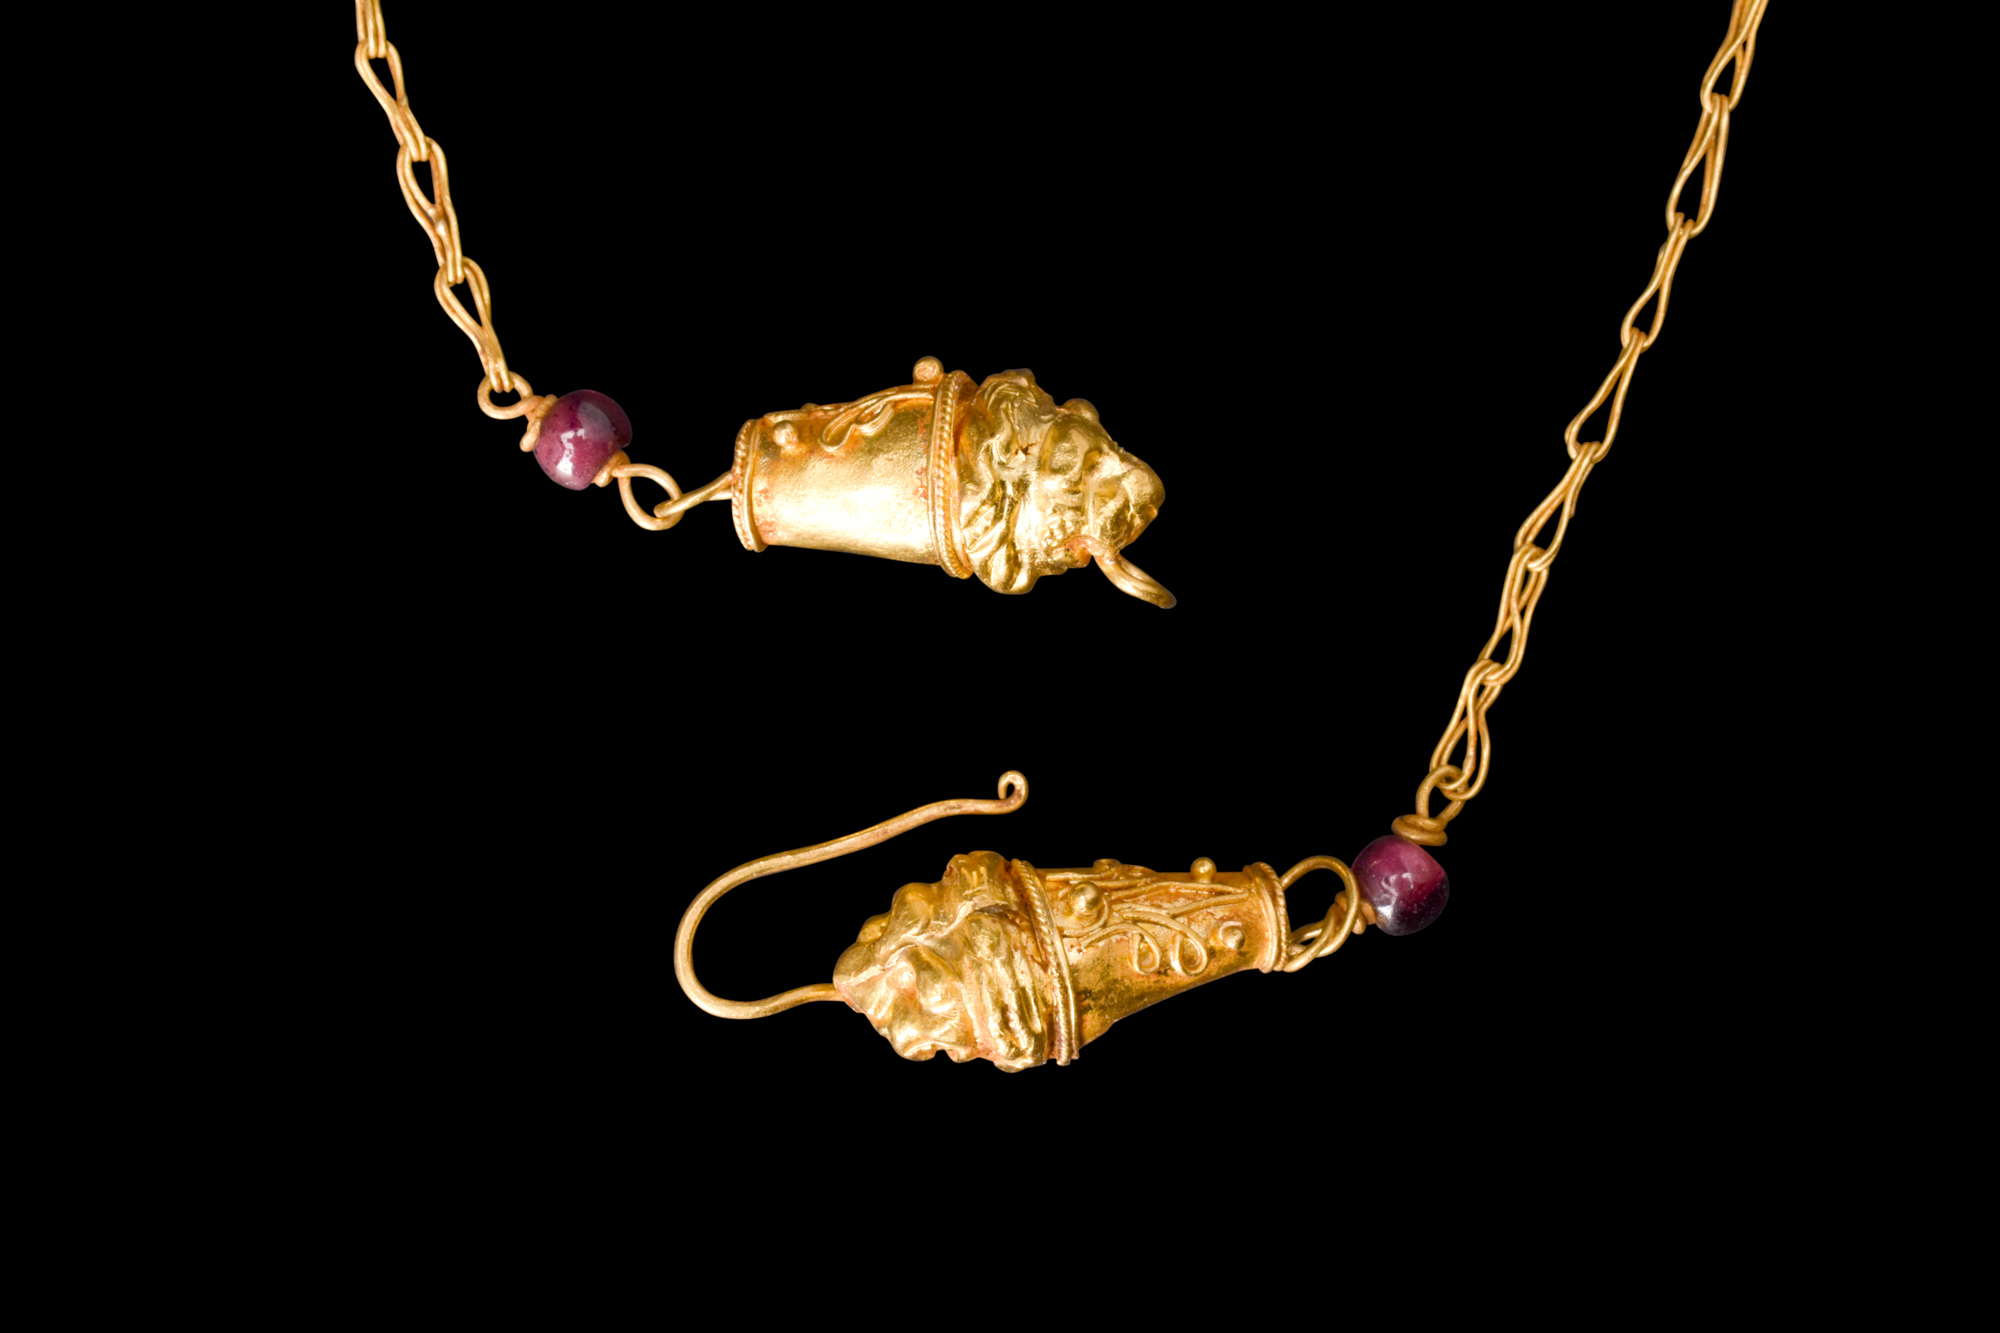 HELLENISTIC GOLD CHAIN WITH LION HEAD FINIALS - Image 10 of 10